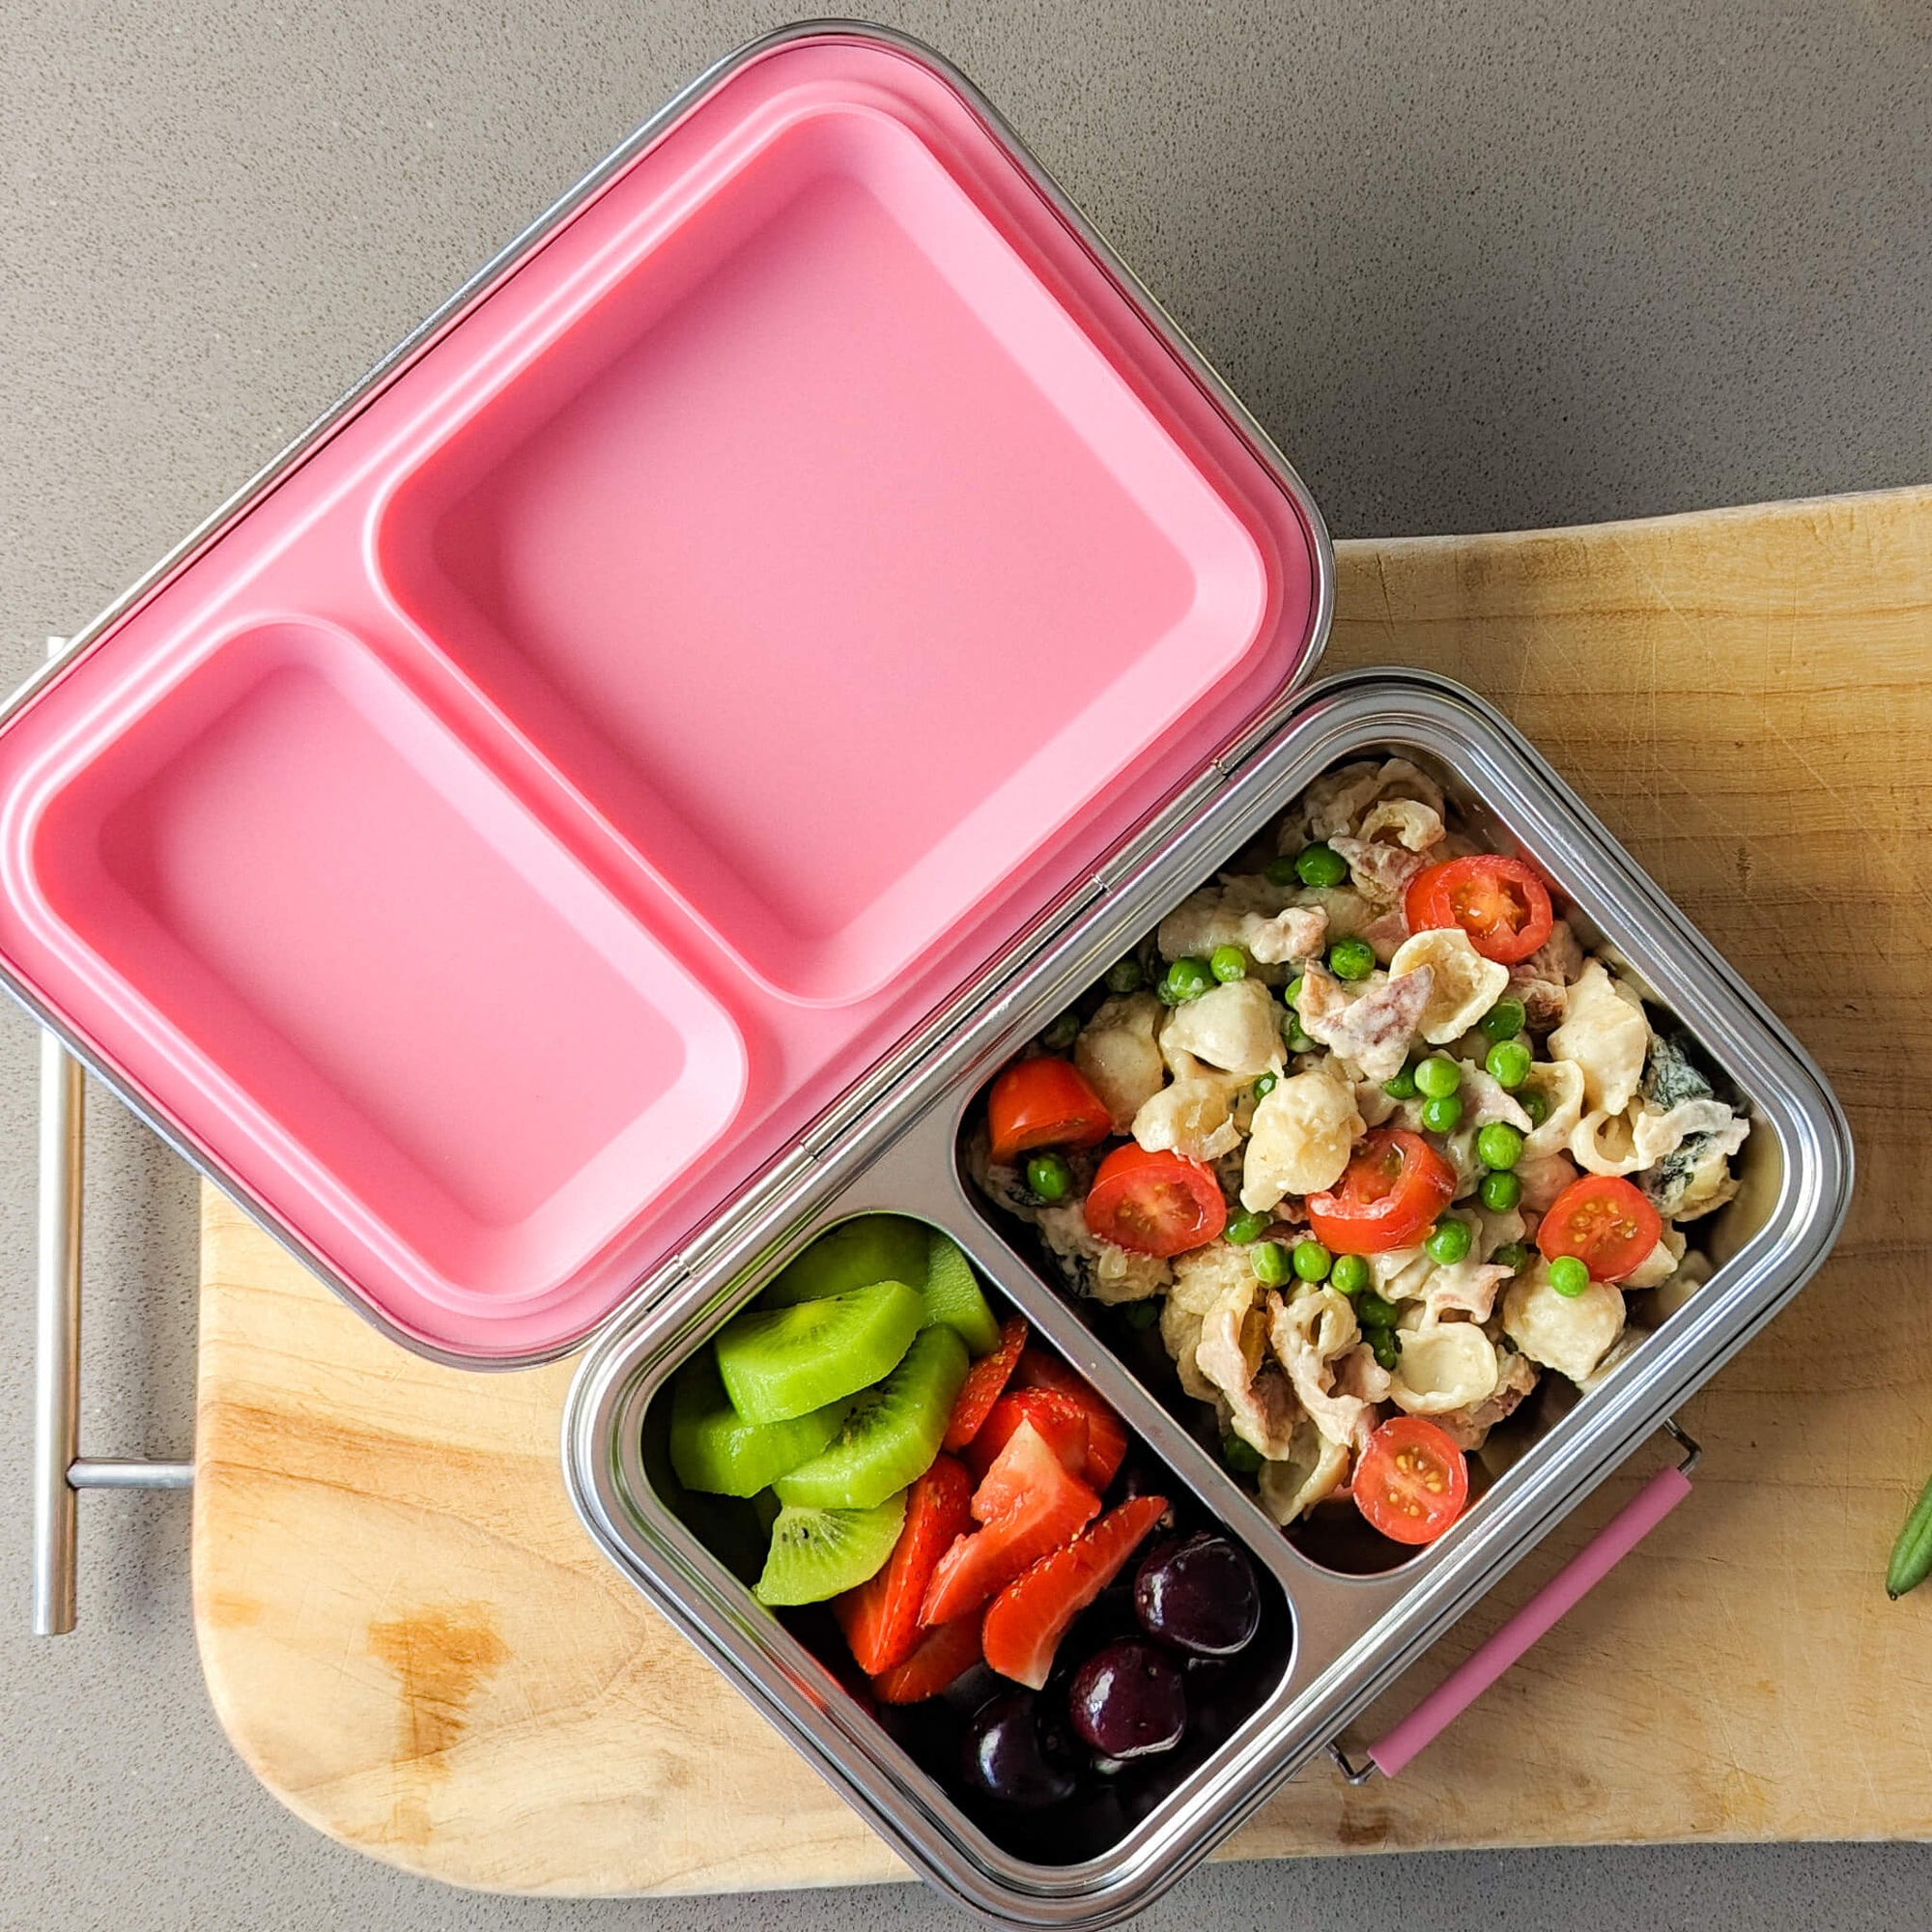 Bento Lunch Box 2 - Stainless Steel - Leak Proof